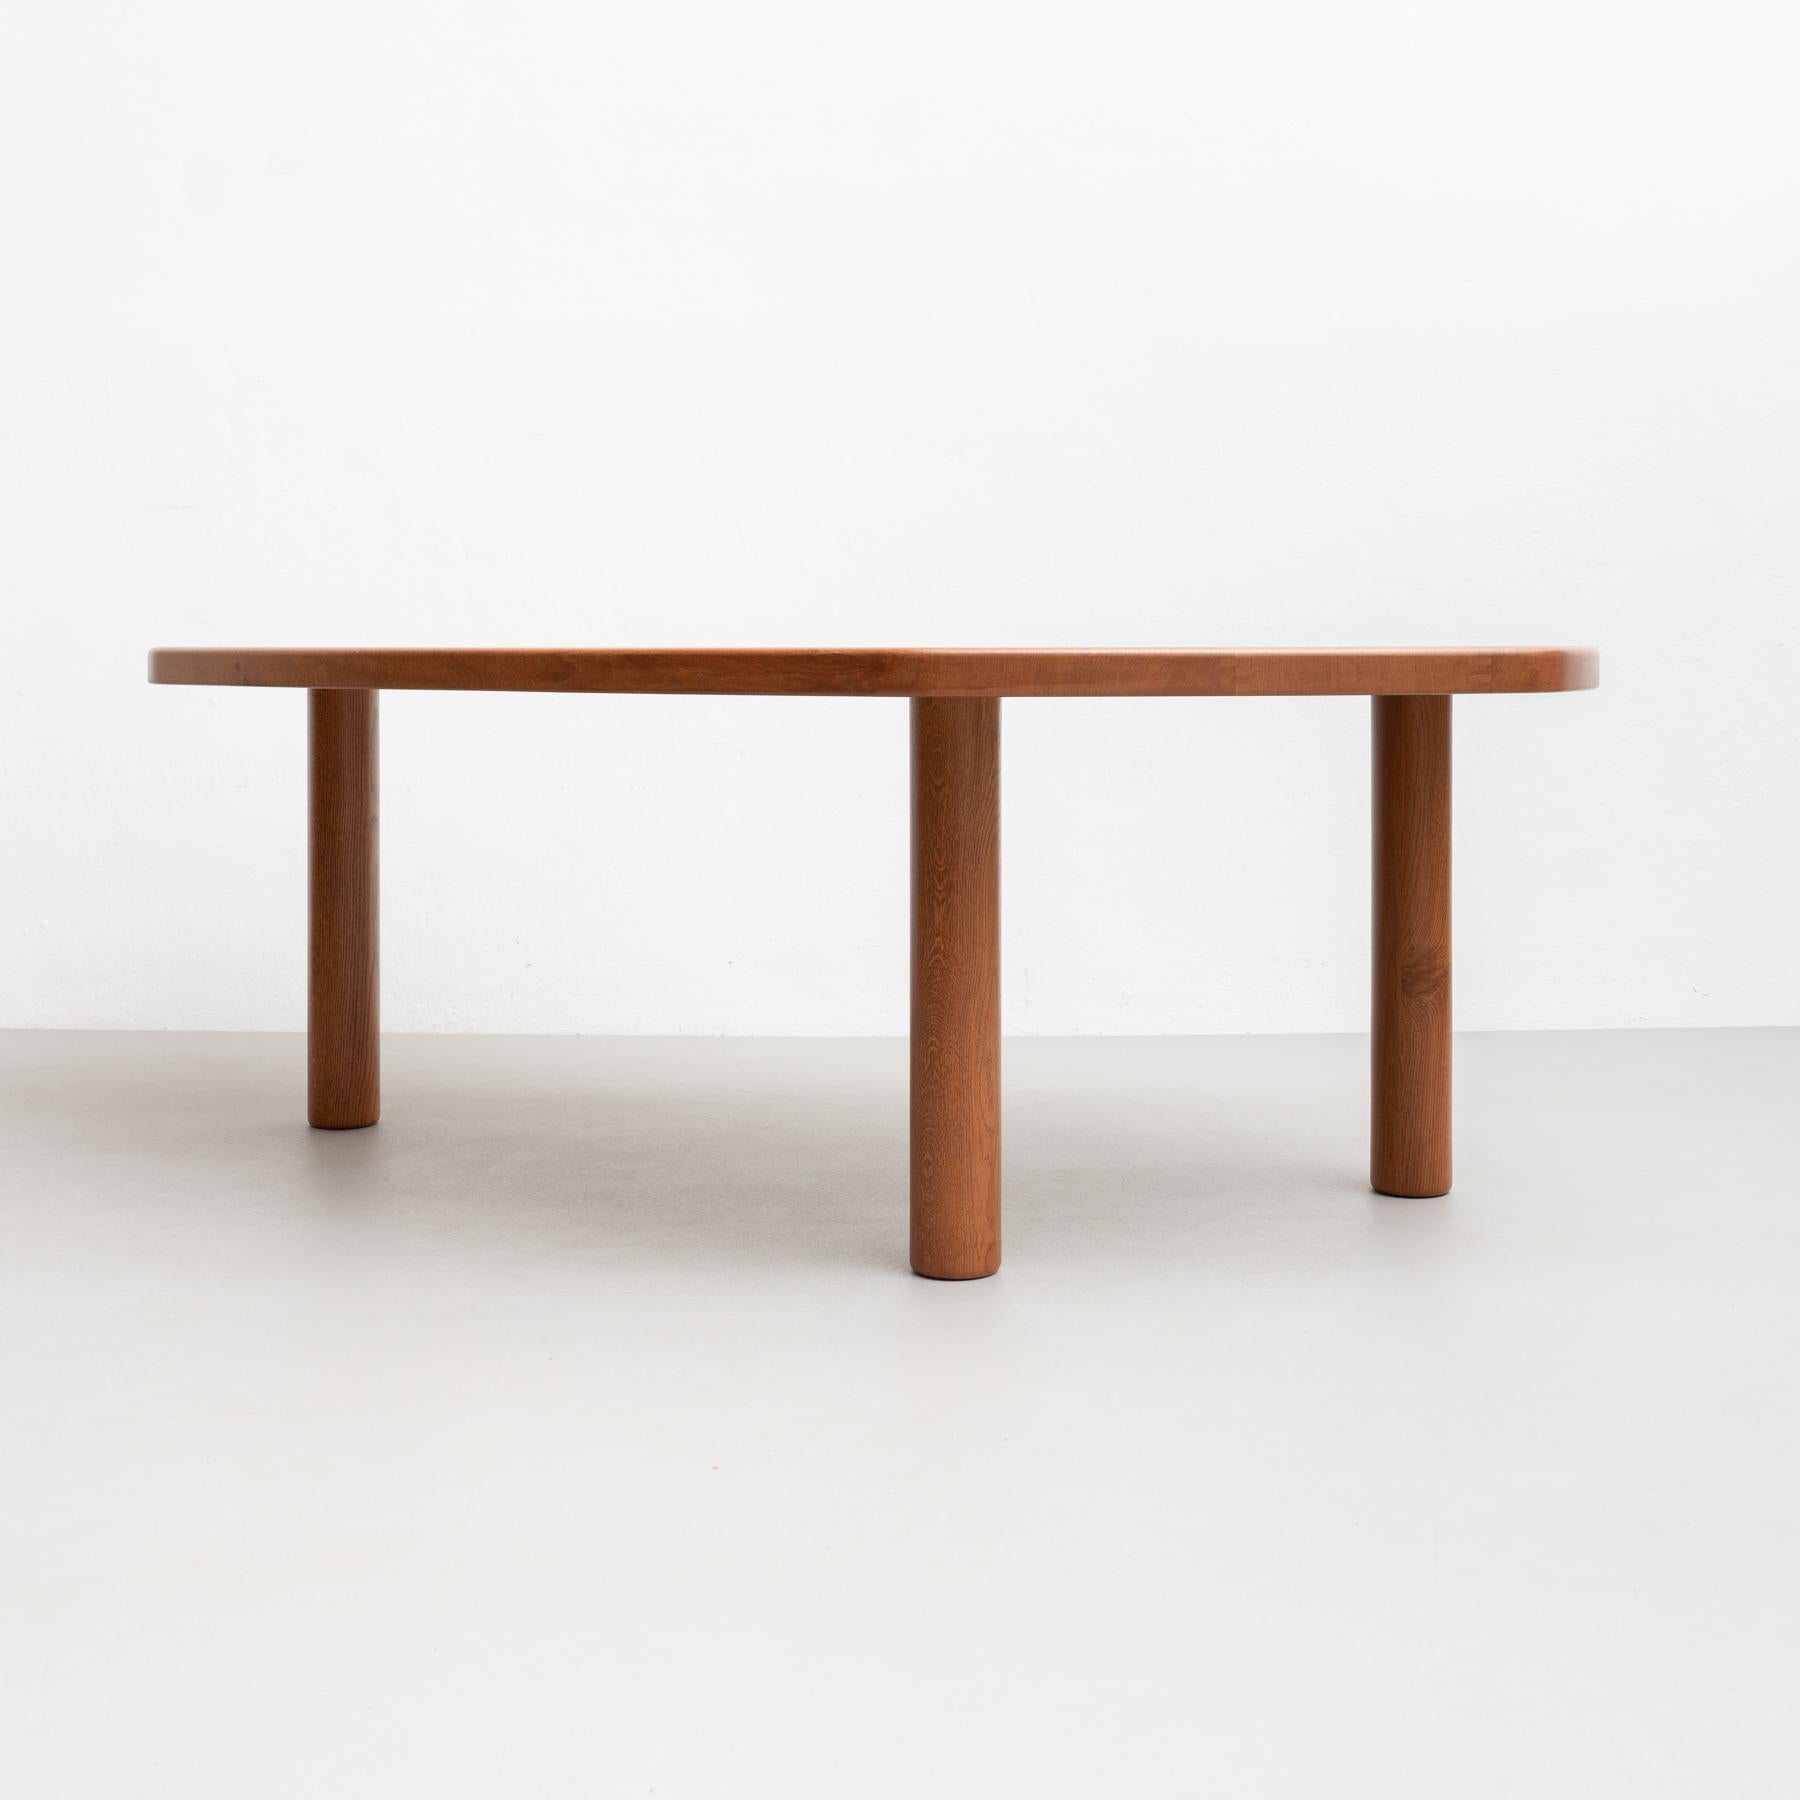 Spanish Dada Est. Contemporary, Oak Freeform Dining Large Table For Sale